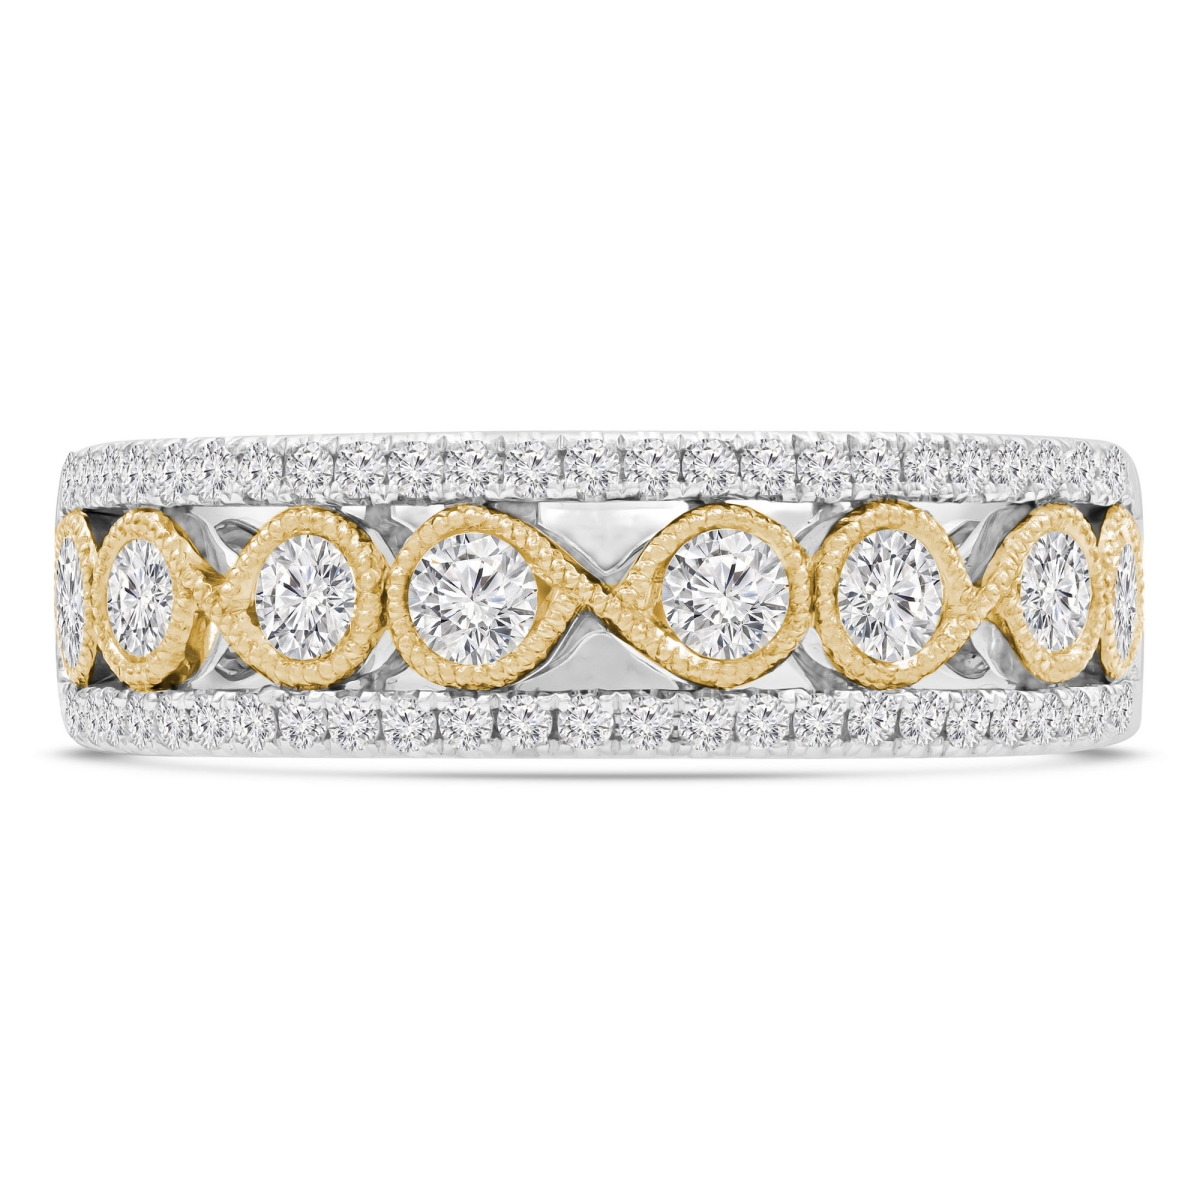 Picture of Majesty Diamonds MDR220224-4.5 0.67 CTW Round Diamond Vintage Infinity Semi-Eternity Anniversary Wedding Band Ring in 14K Two-Tone Gold - Size 4.5